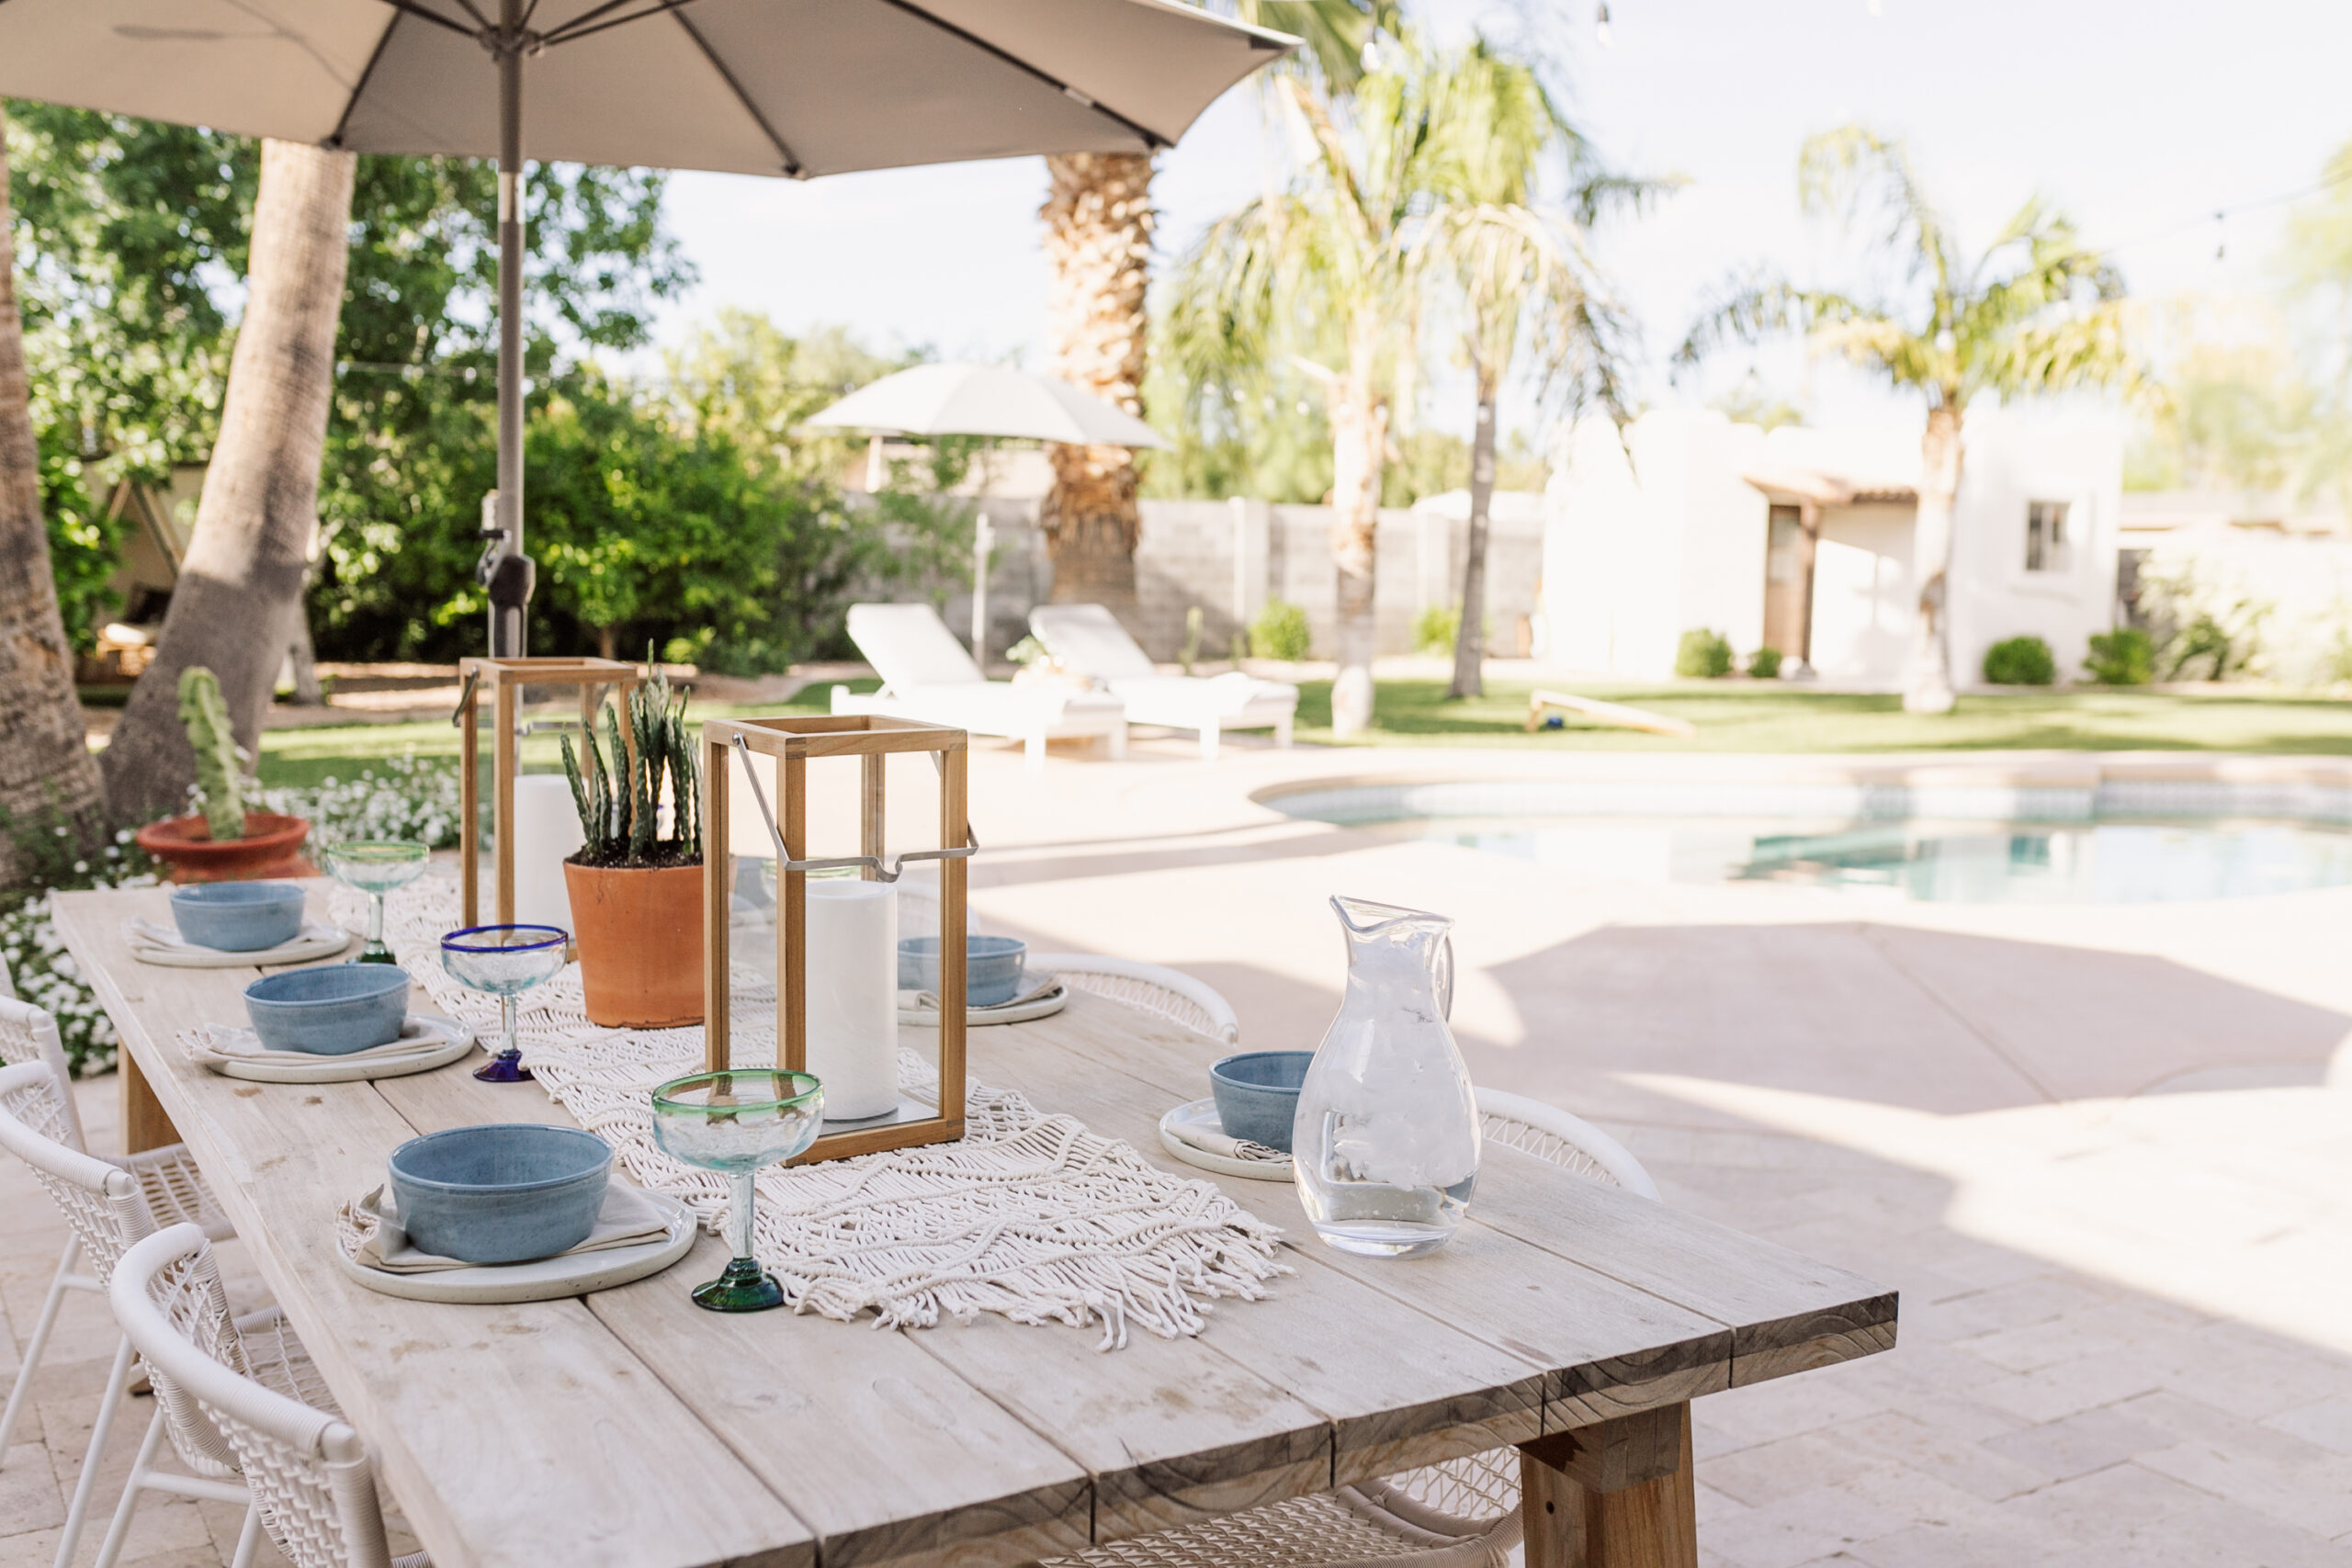 we love eating out here in the warmer months #ourarticle #outdoordining #backyardliving #salachair #teakatable